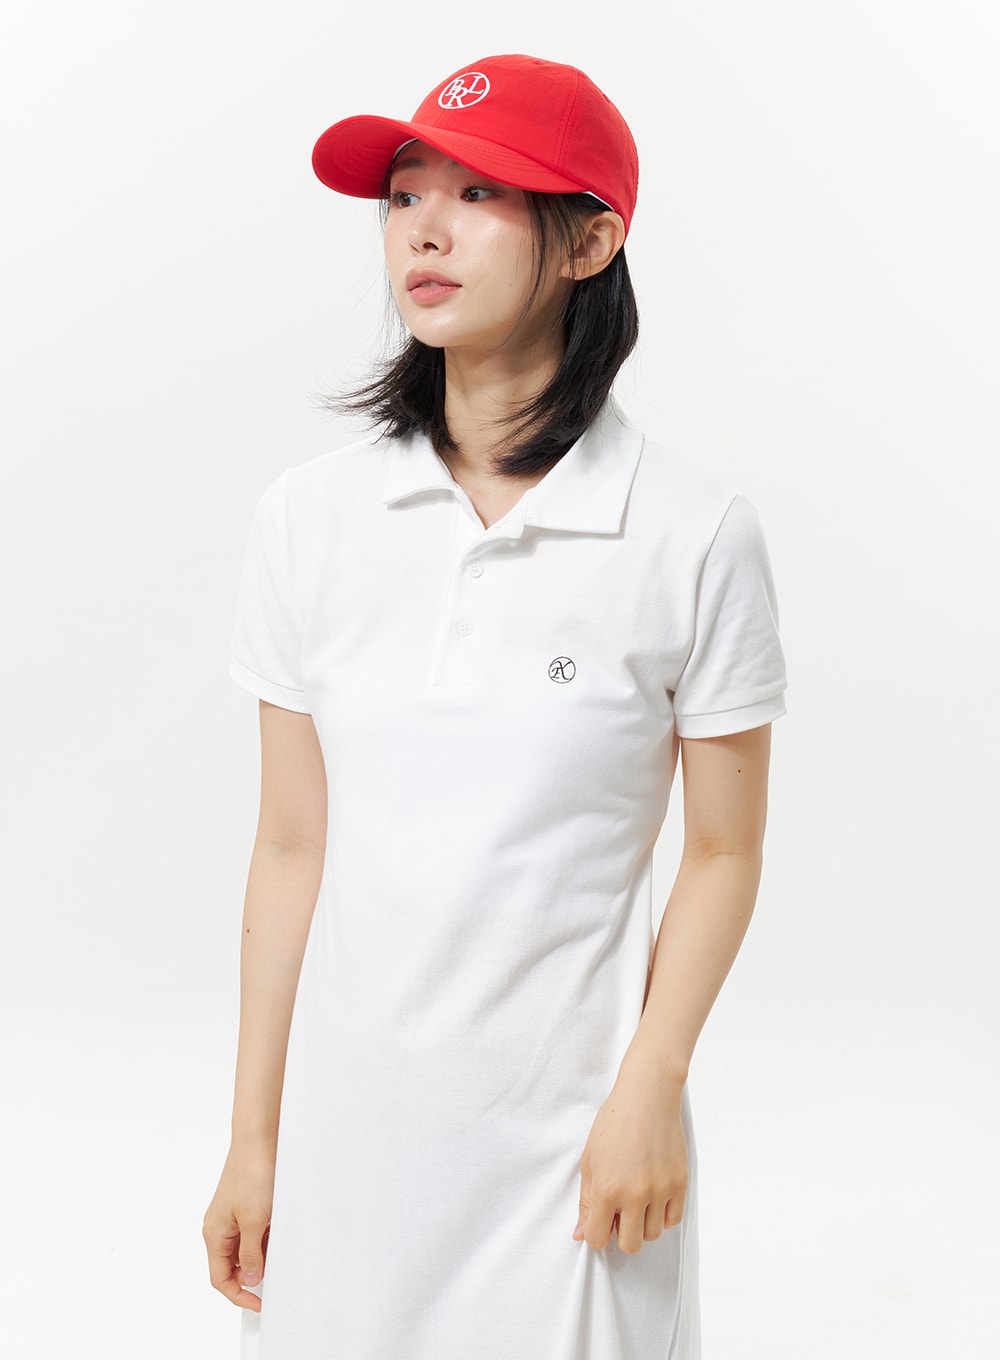 embroidered-baseball-cap-oy323